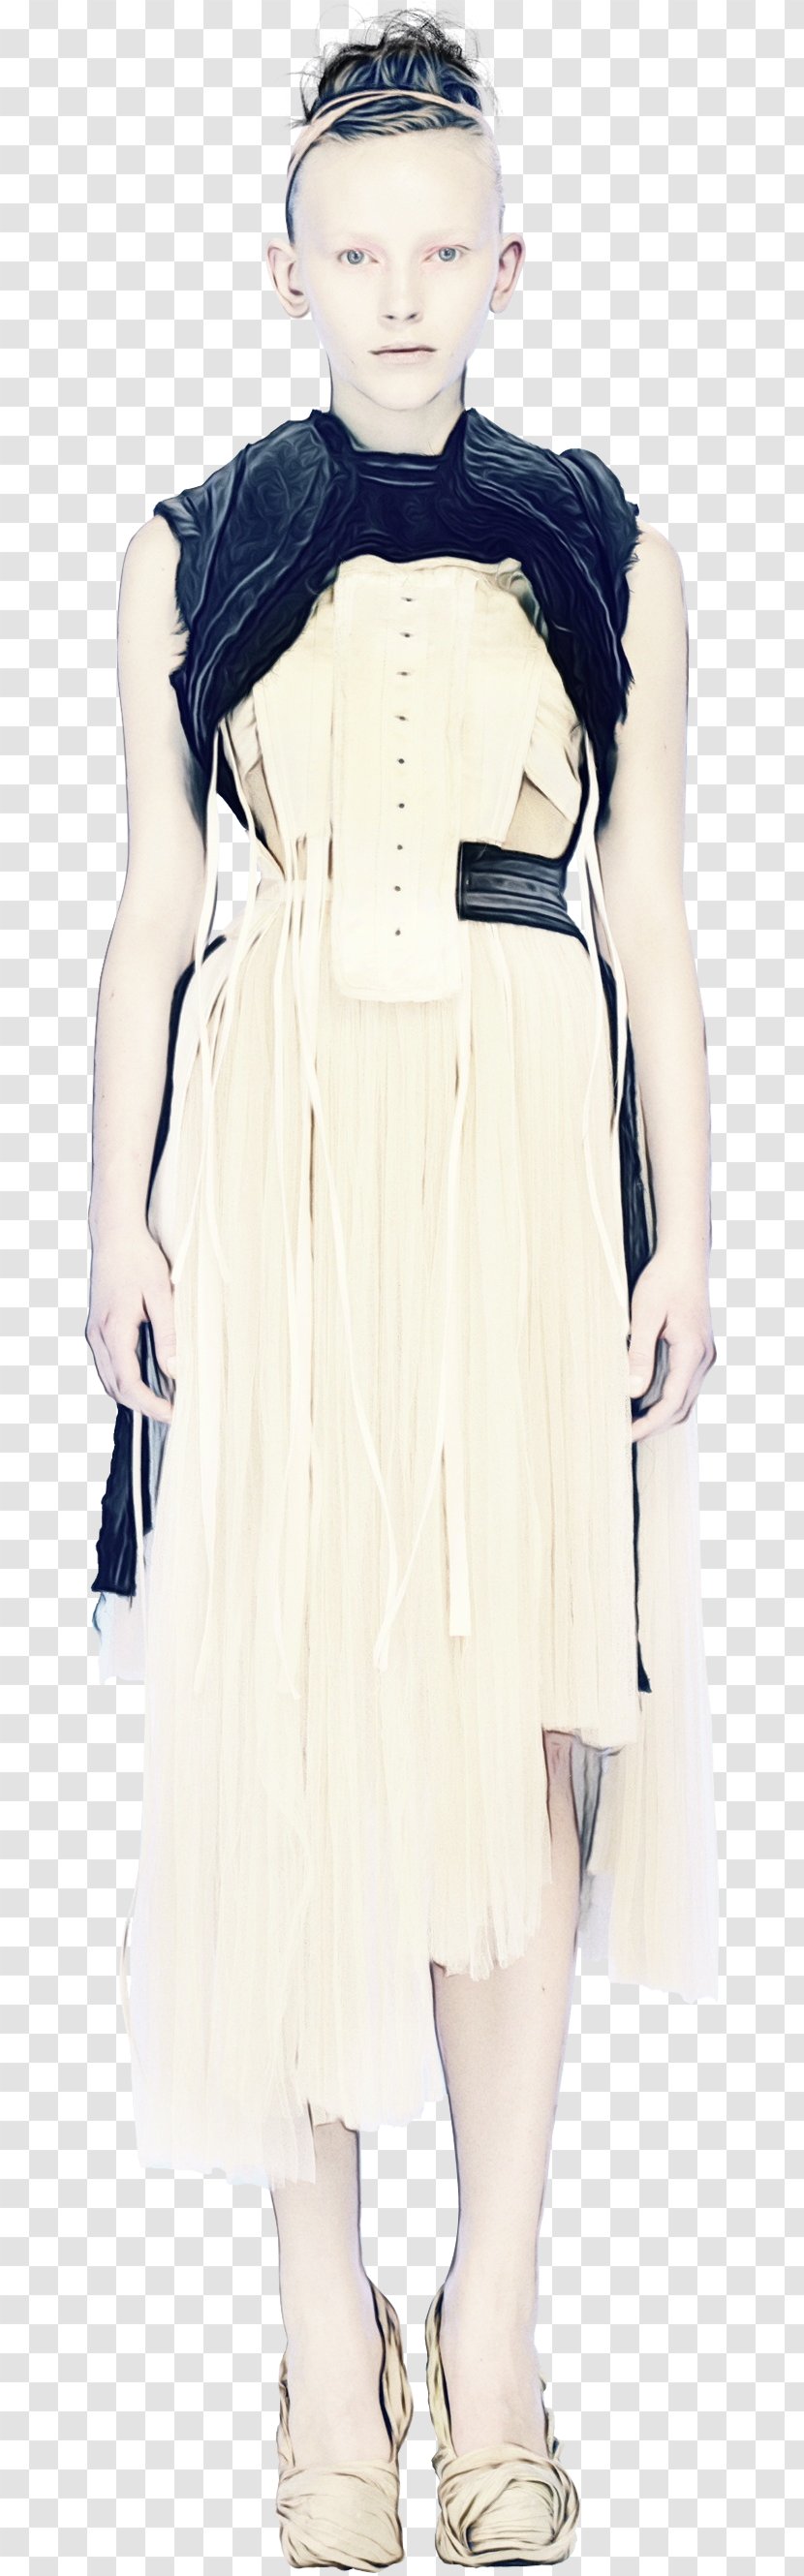 Watercolor Cartoon - Wet Ink - Fashion Design Gown Transparent PNG